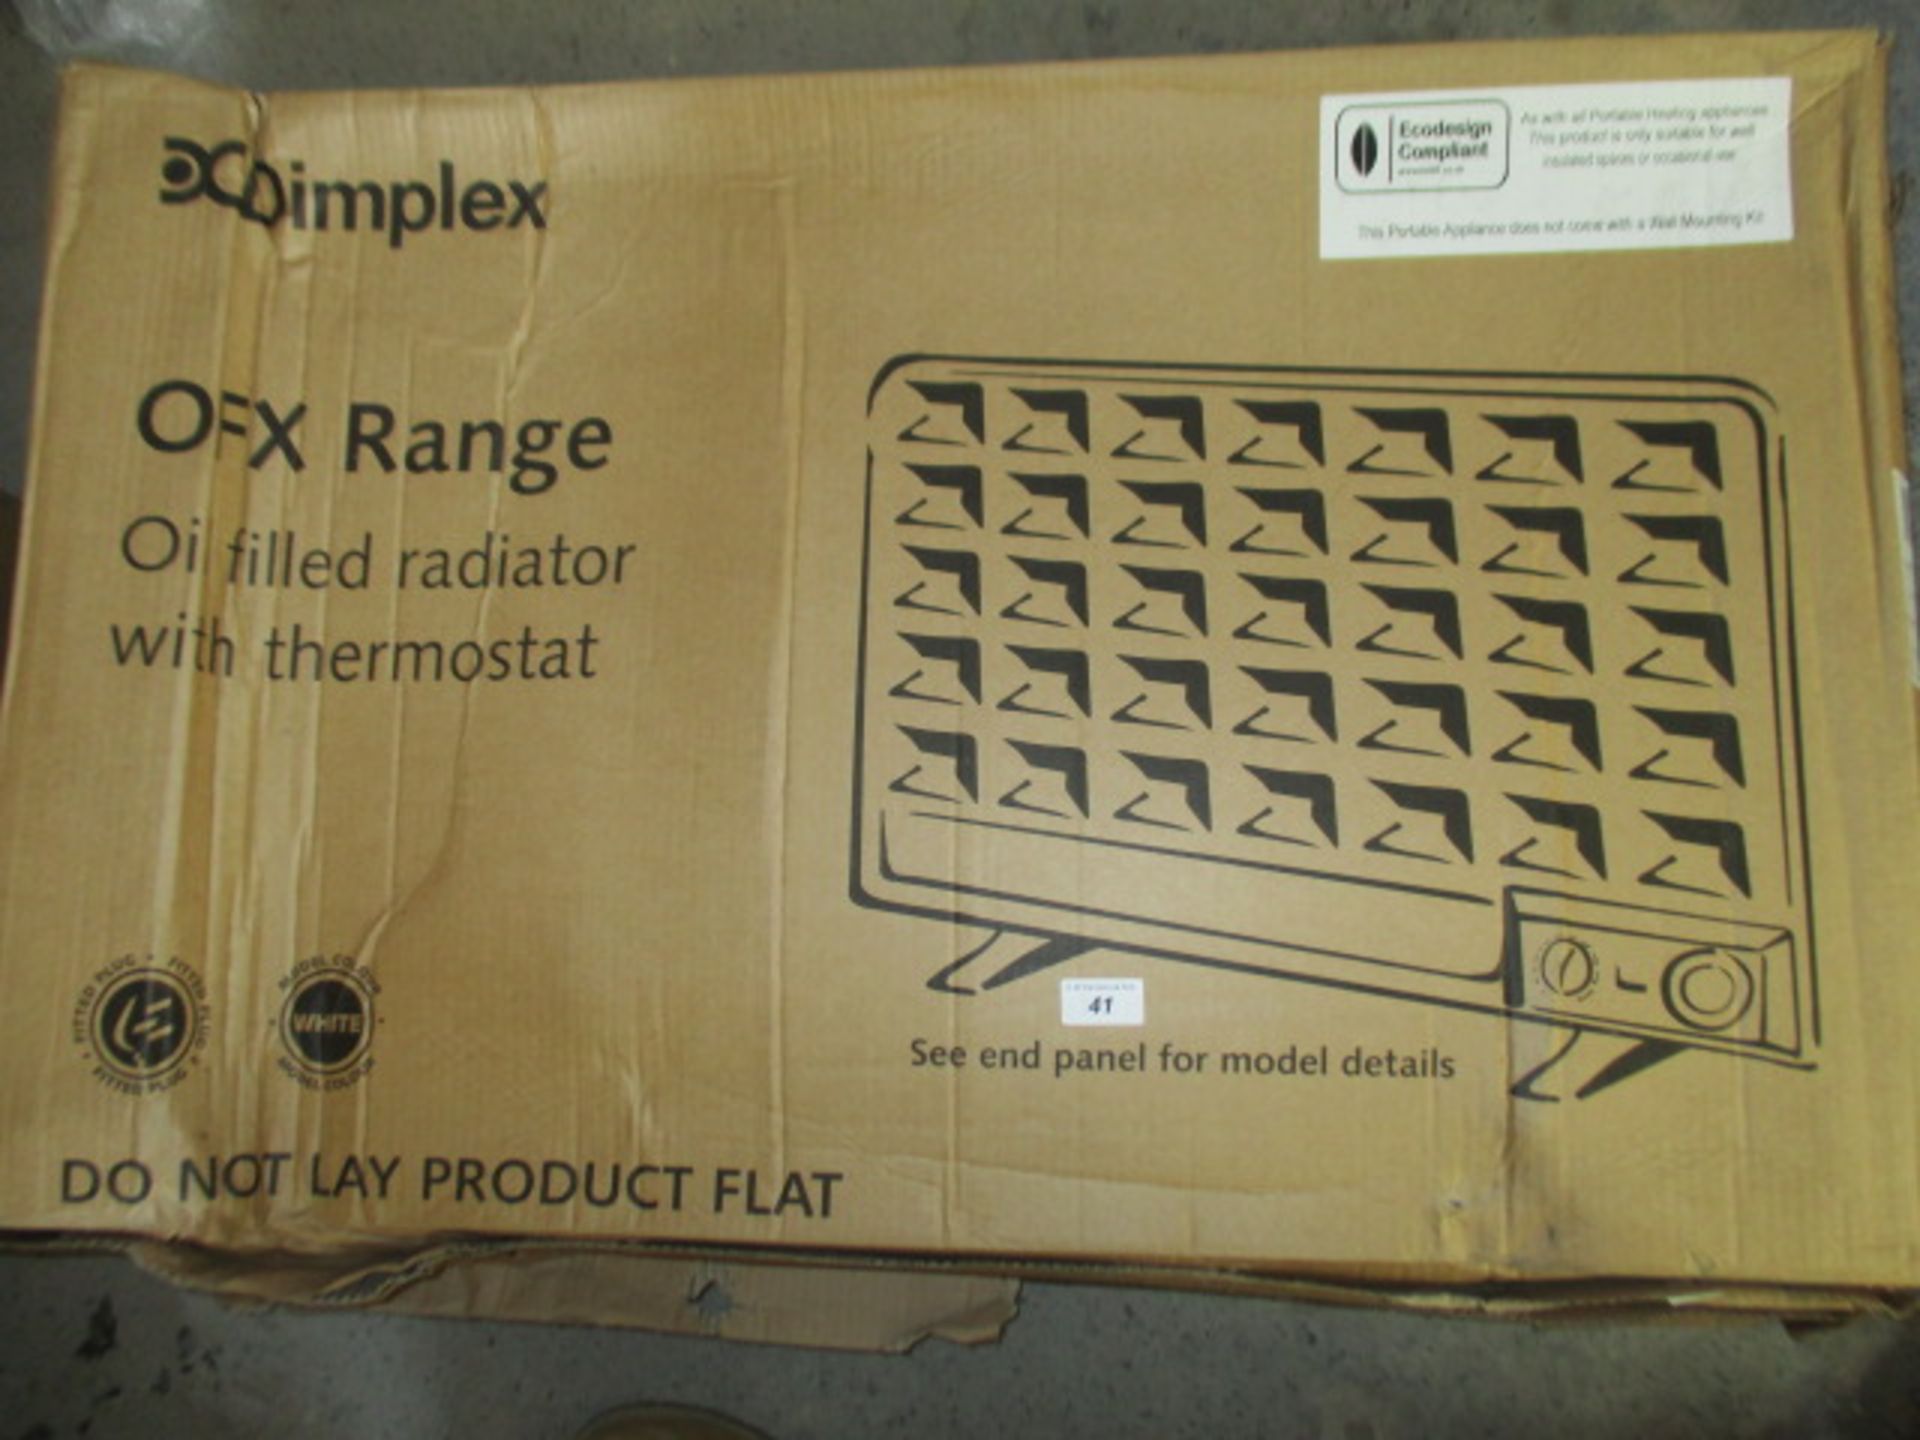 Dimplex oil filled radiator with thermostat OFX1000TI